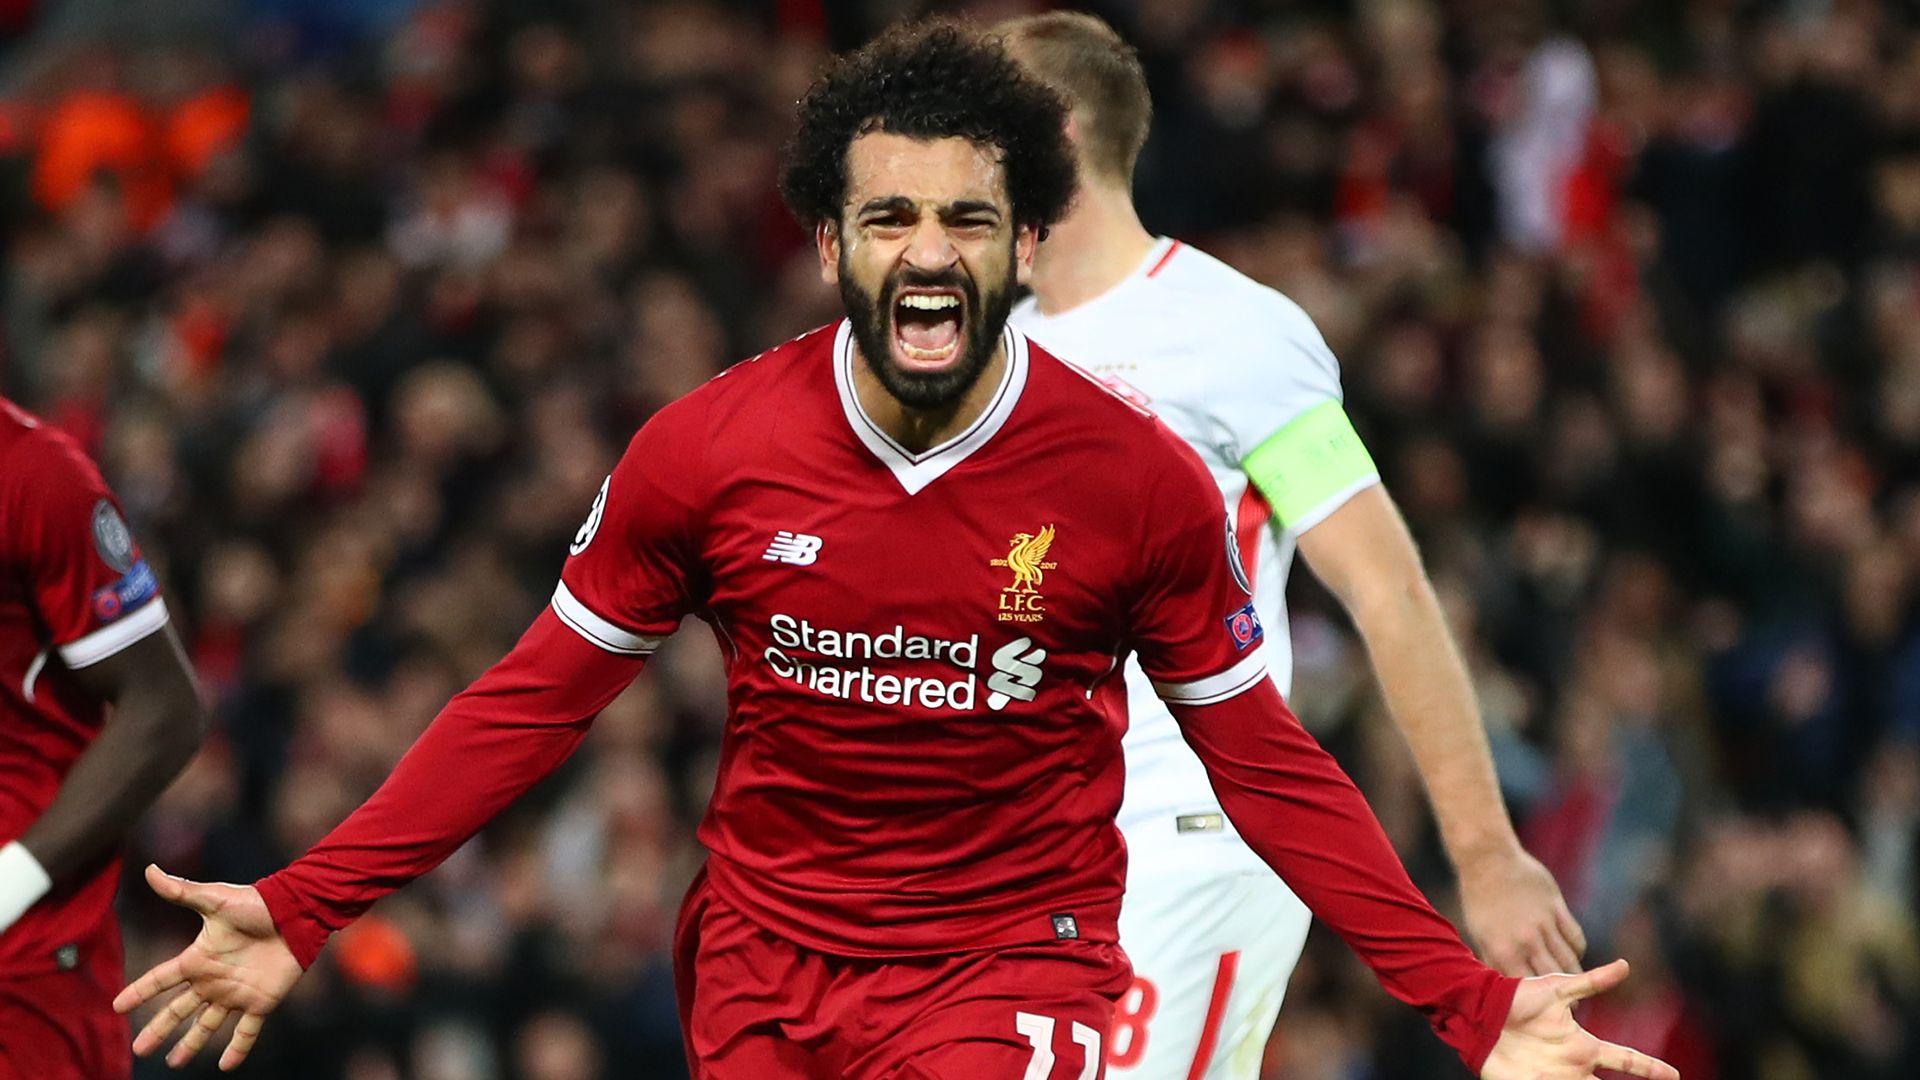 Mohamed Salah: My best Liverpool goals and 2018 silverware ambitions